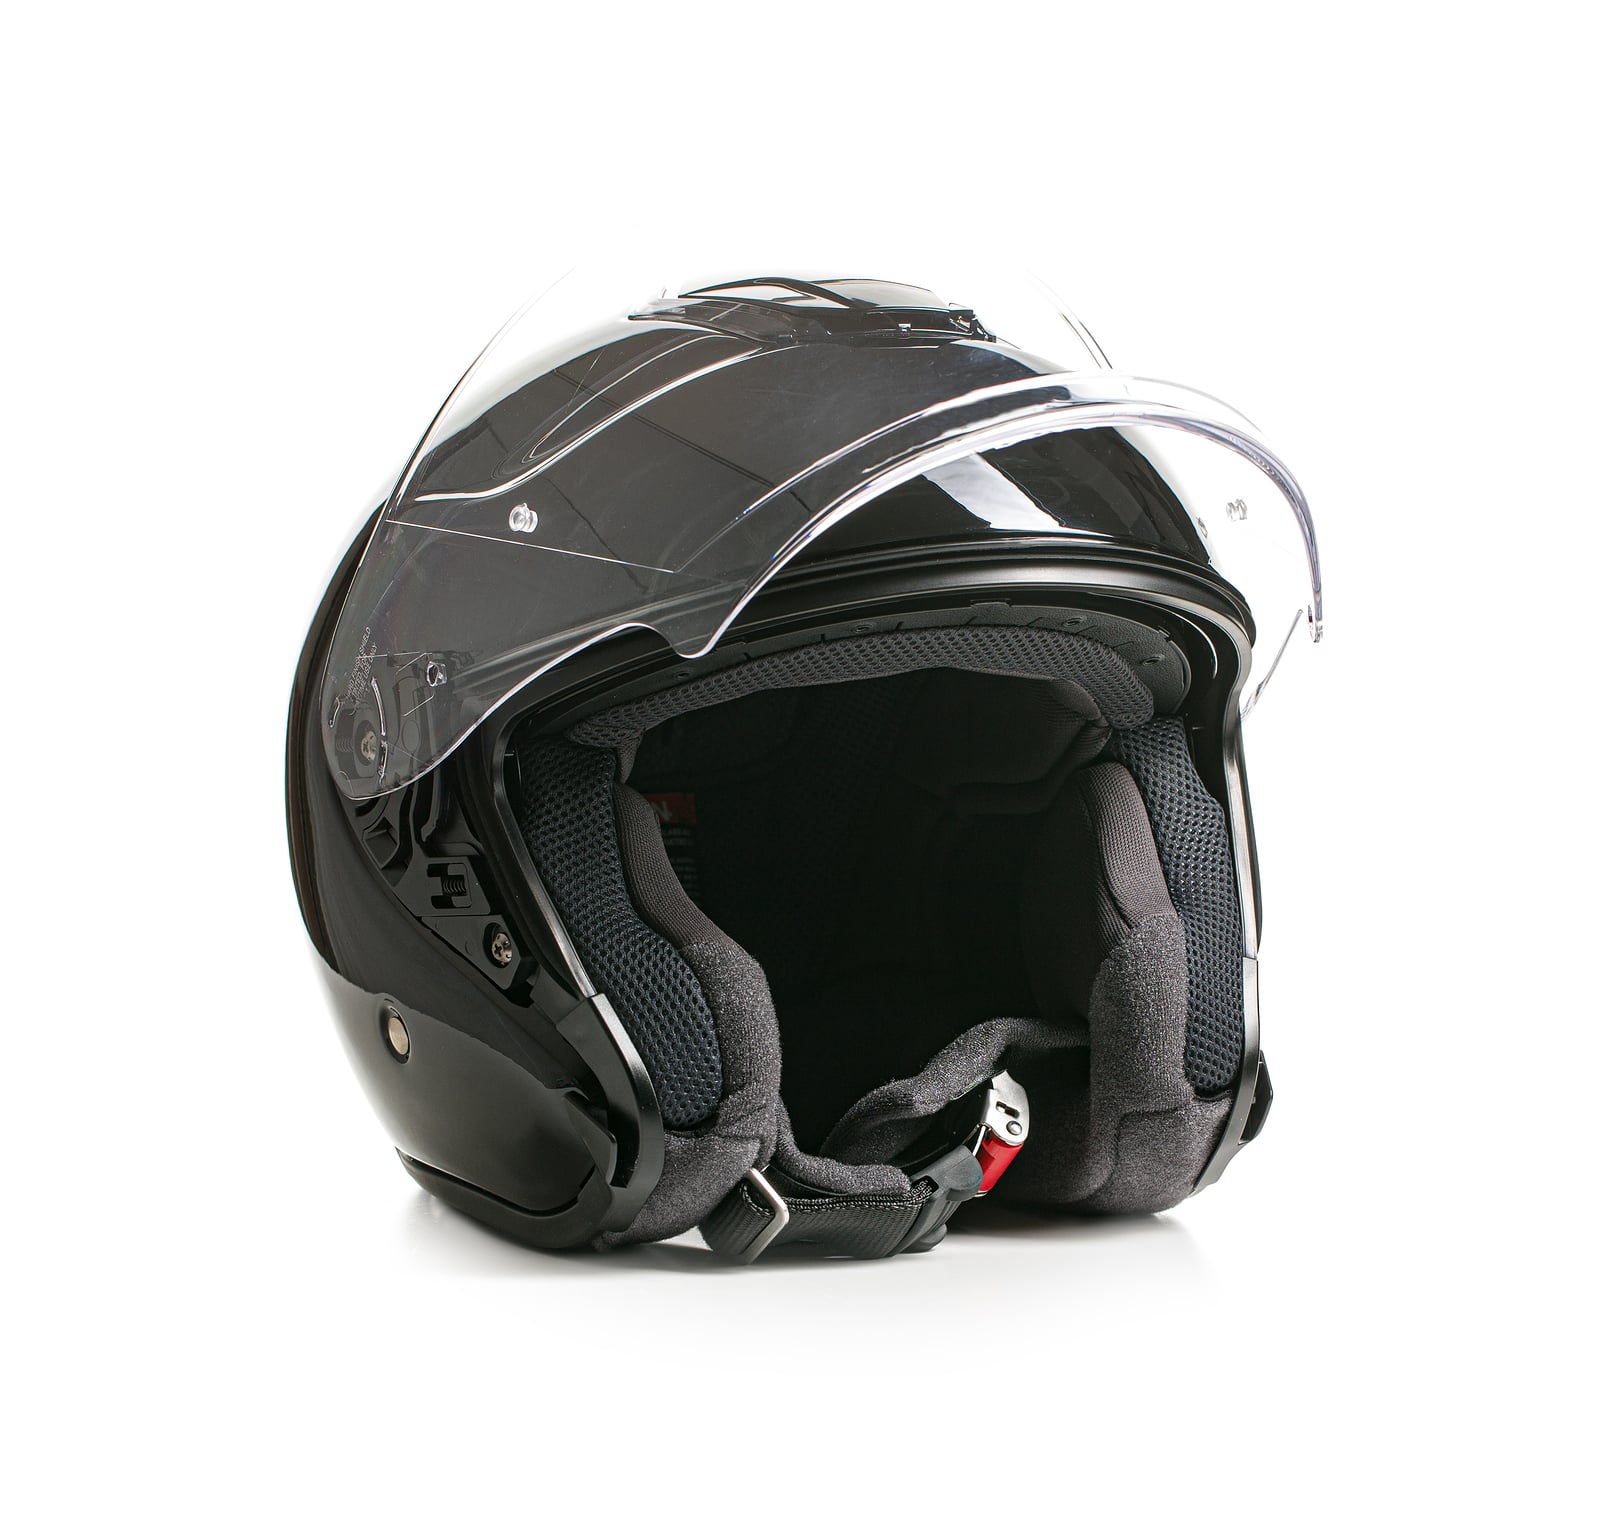 Motorcycle Helmet Laws in Illinois and the Surrounding States